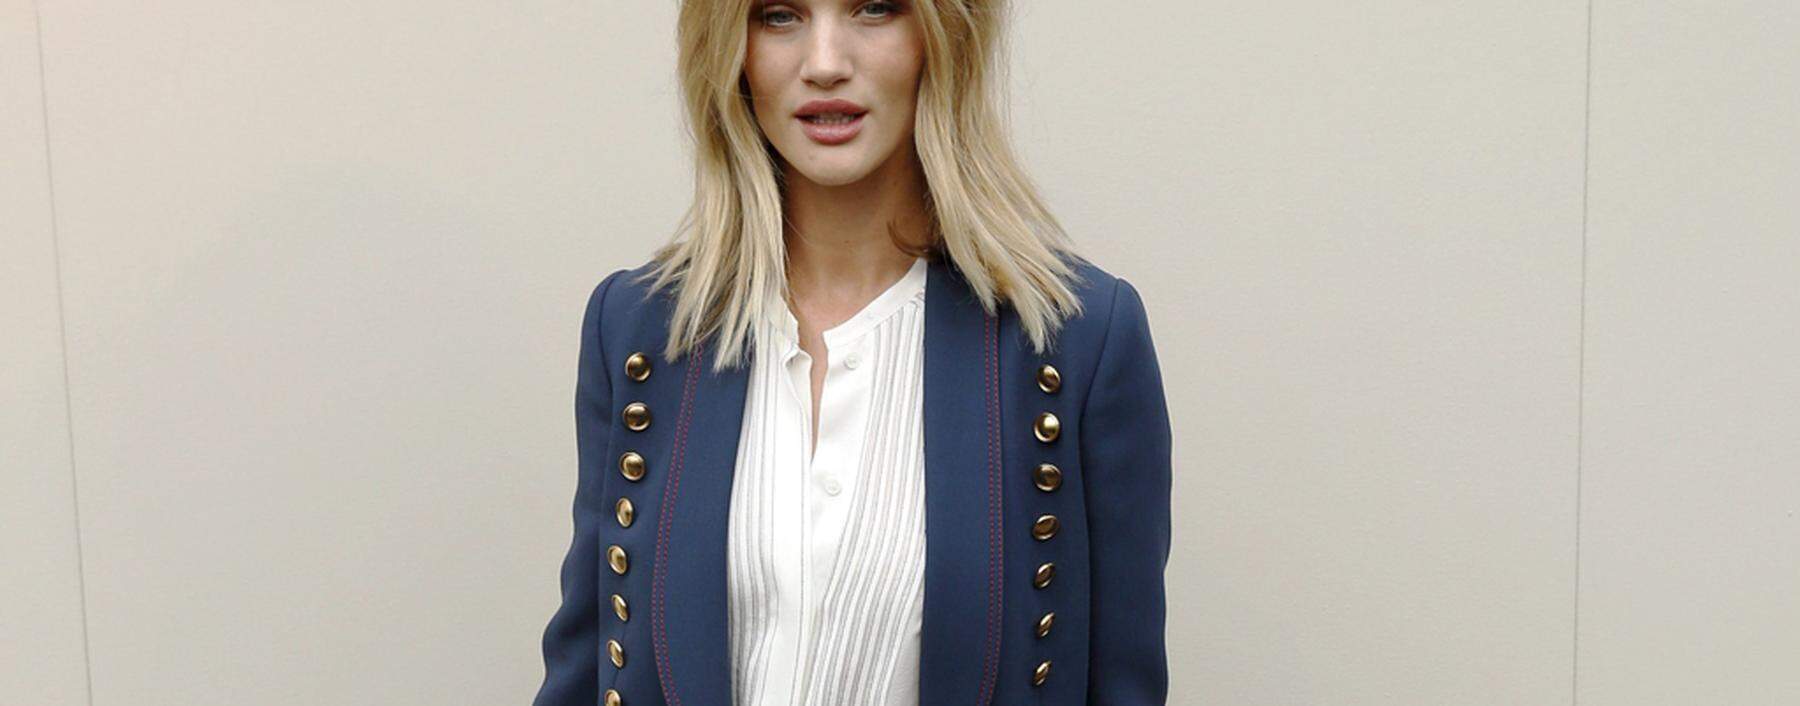 Model Rosie Huntington-Whiteley arrives for the Burberry catwalk show at London Fashion Week Autumn/Winter 2016 in London, Britain